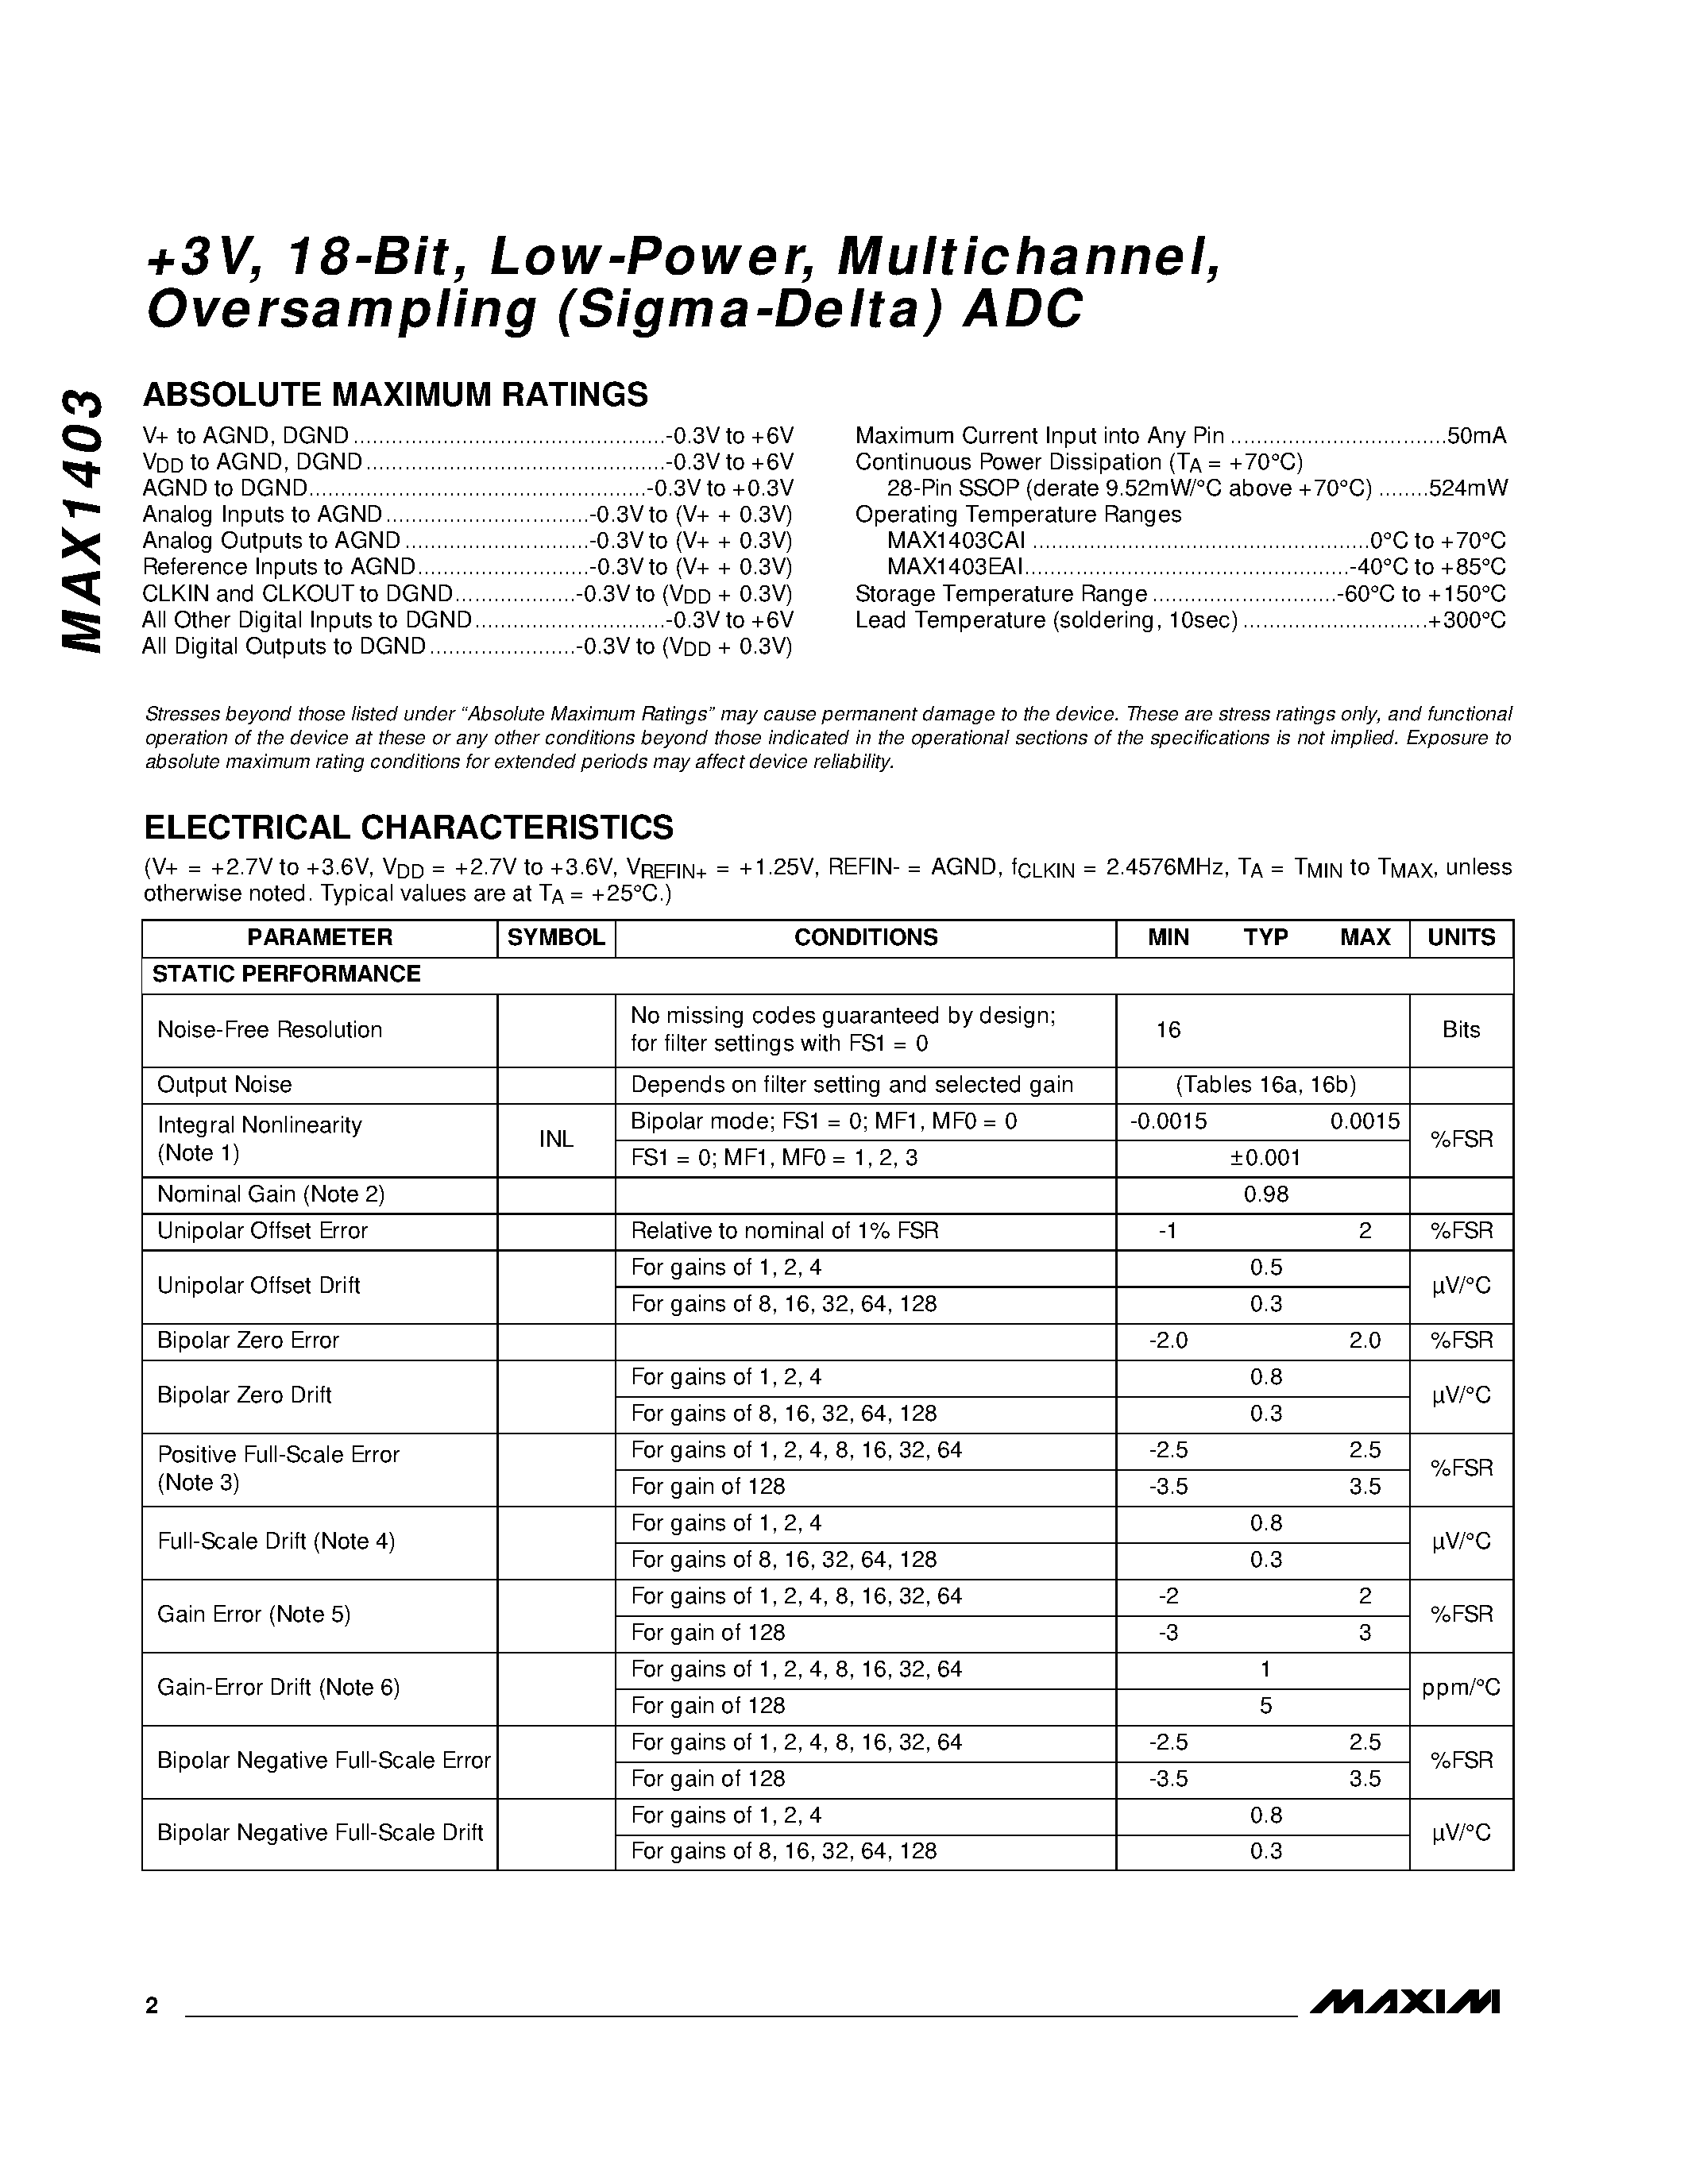 Datasheet MAX1403EAI - +3V / 18-Bit / Low-Power / Multichannel / Oversampling Sigma-Delta ADC page 2